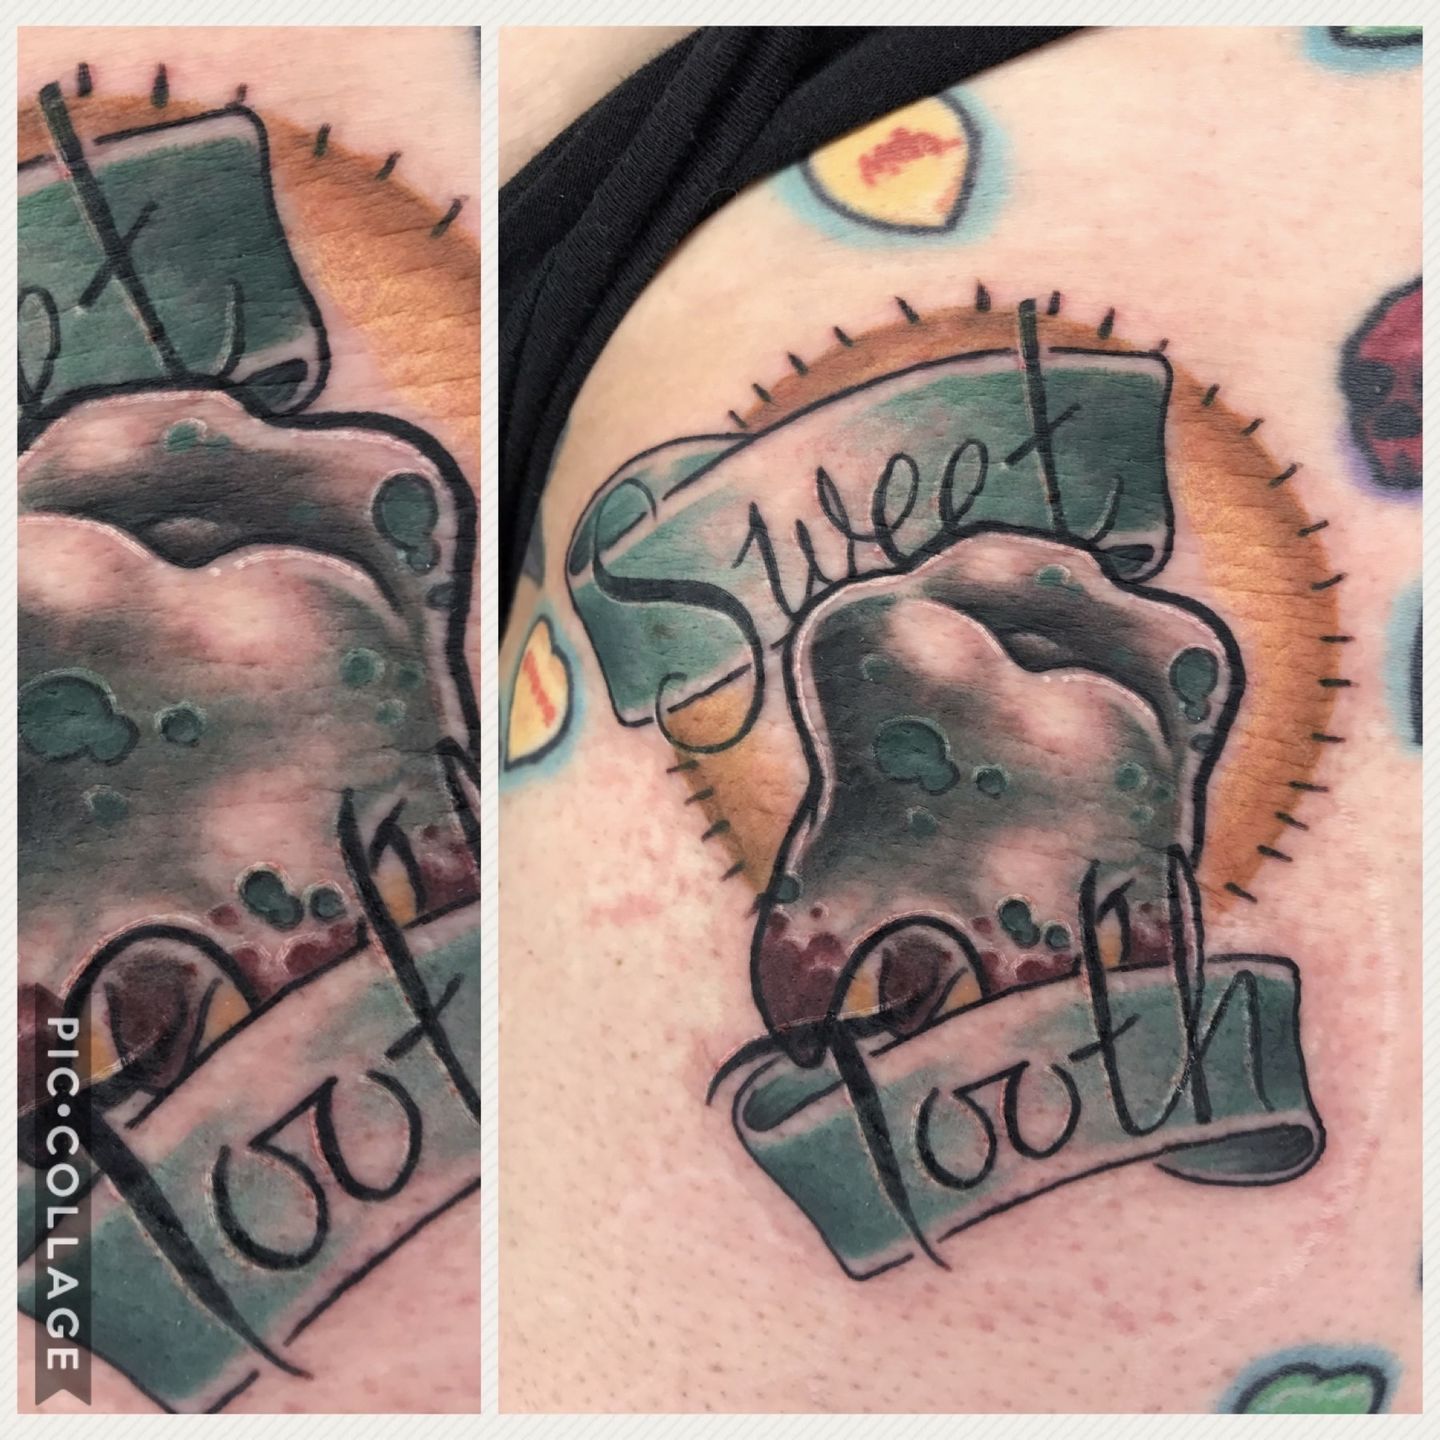 Top Loveable Candy Heart Tattoo Ideas | Candy tattoo, Love heart tattoo,  Heart tattoo